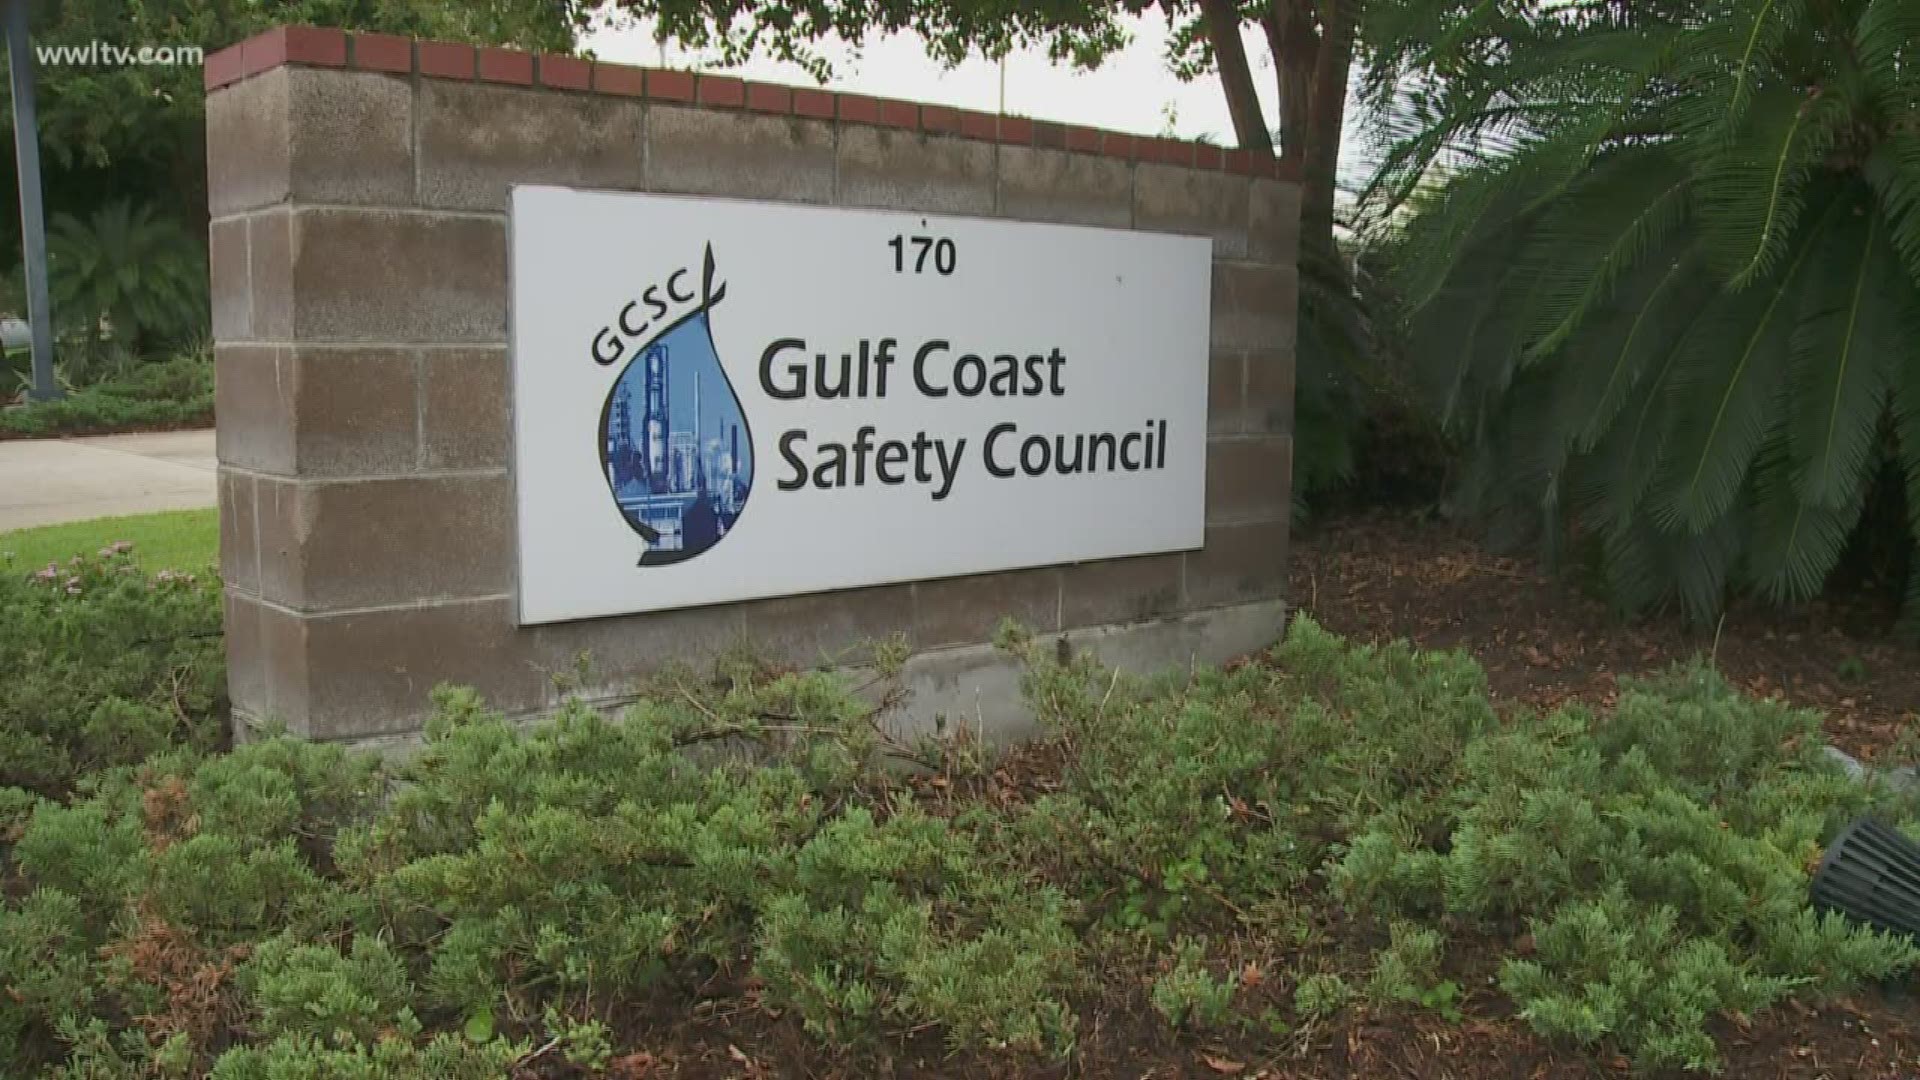 One Nicaraguan and 14 Mexican suspects are now in custody after U.S. Border Patrol officials says they allegedly used fraudulent documents at the Gulf Coast Safety Council in St. Rose Wednesday morning.